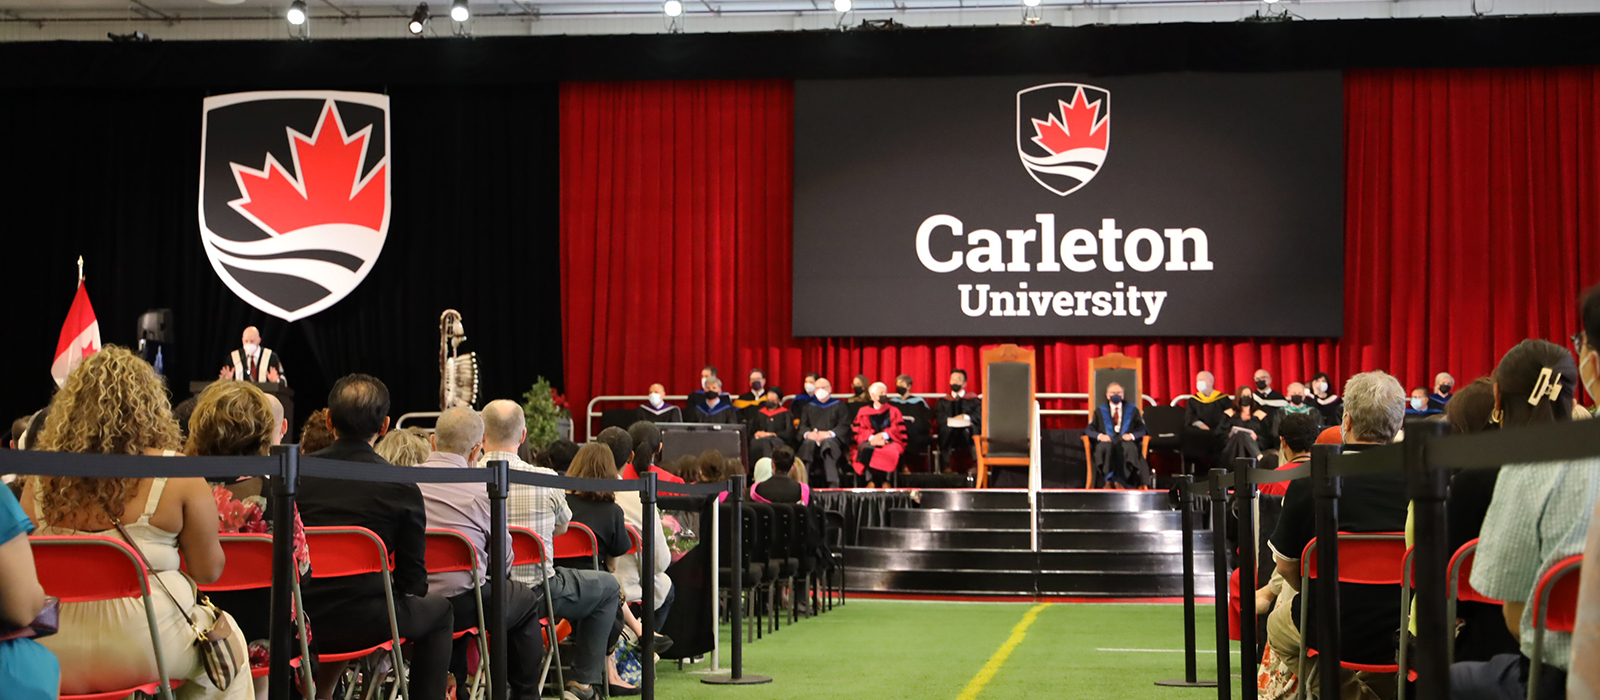 A view of the Carleton University Convocation ceremonies